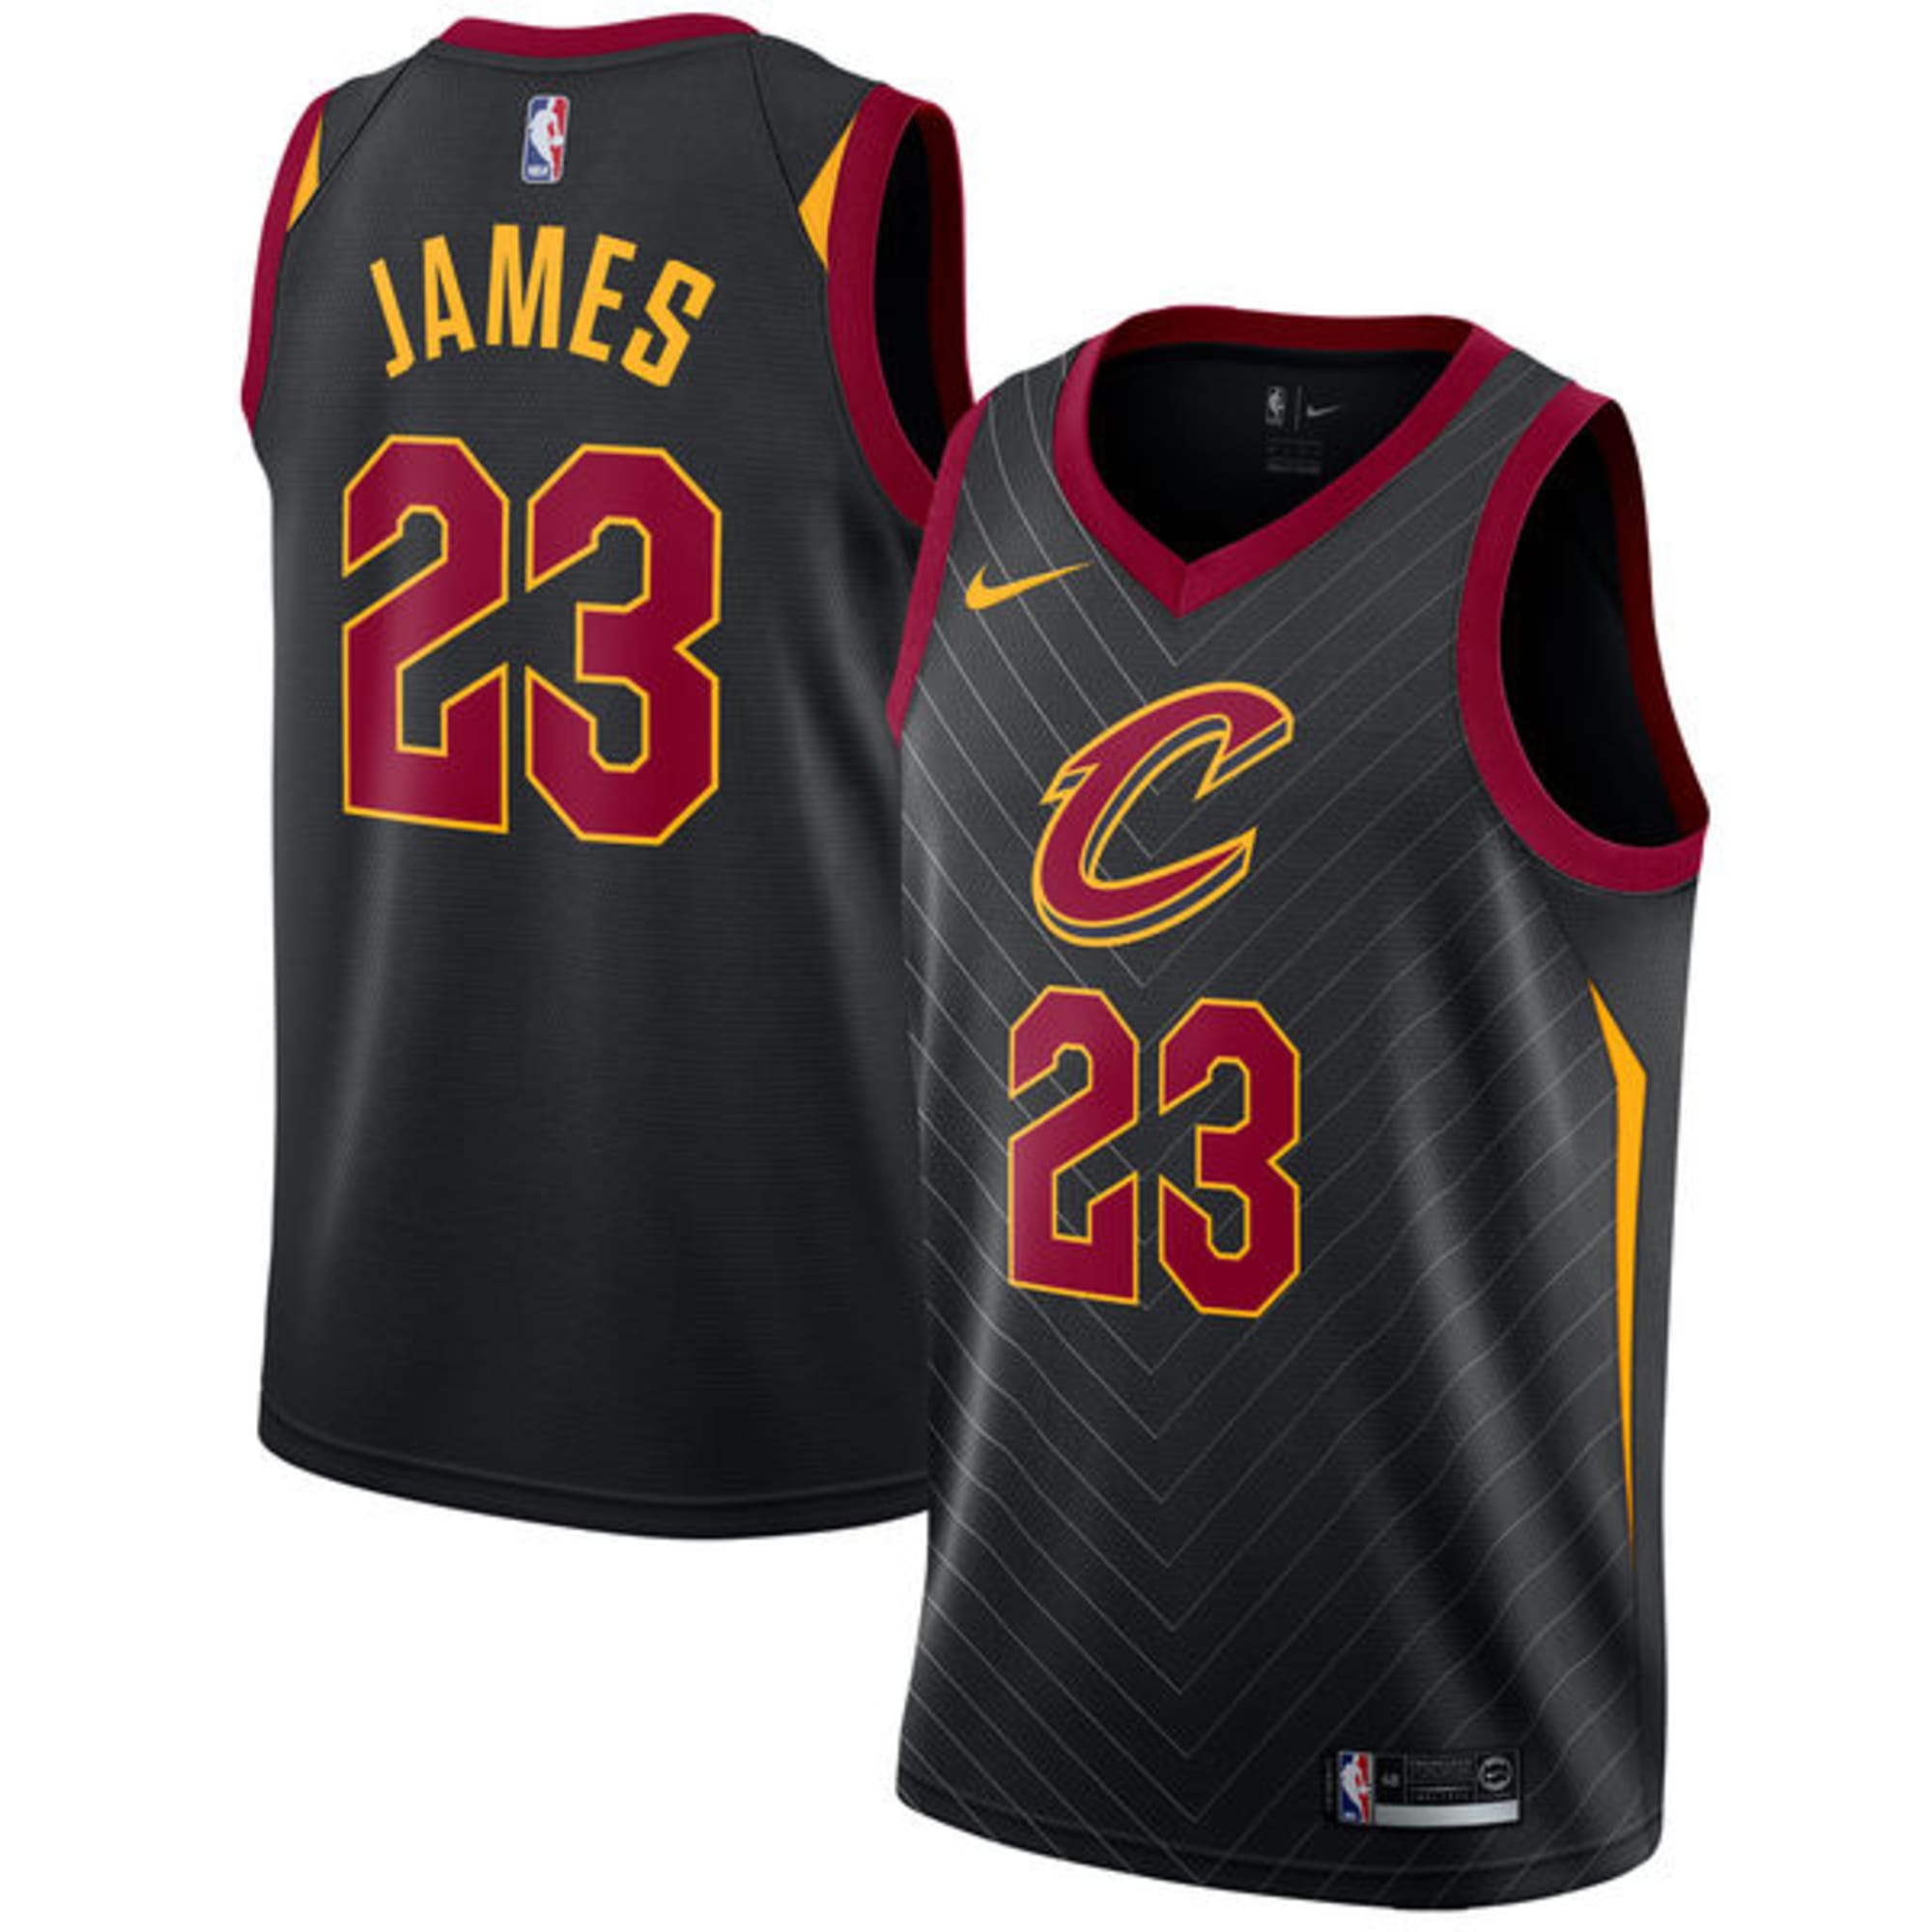 Cleveland Cavaliers NBA Playoffs Gift Guide